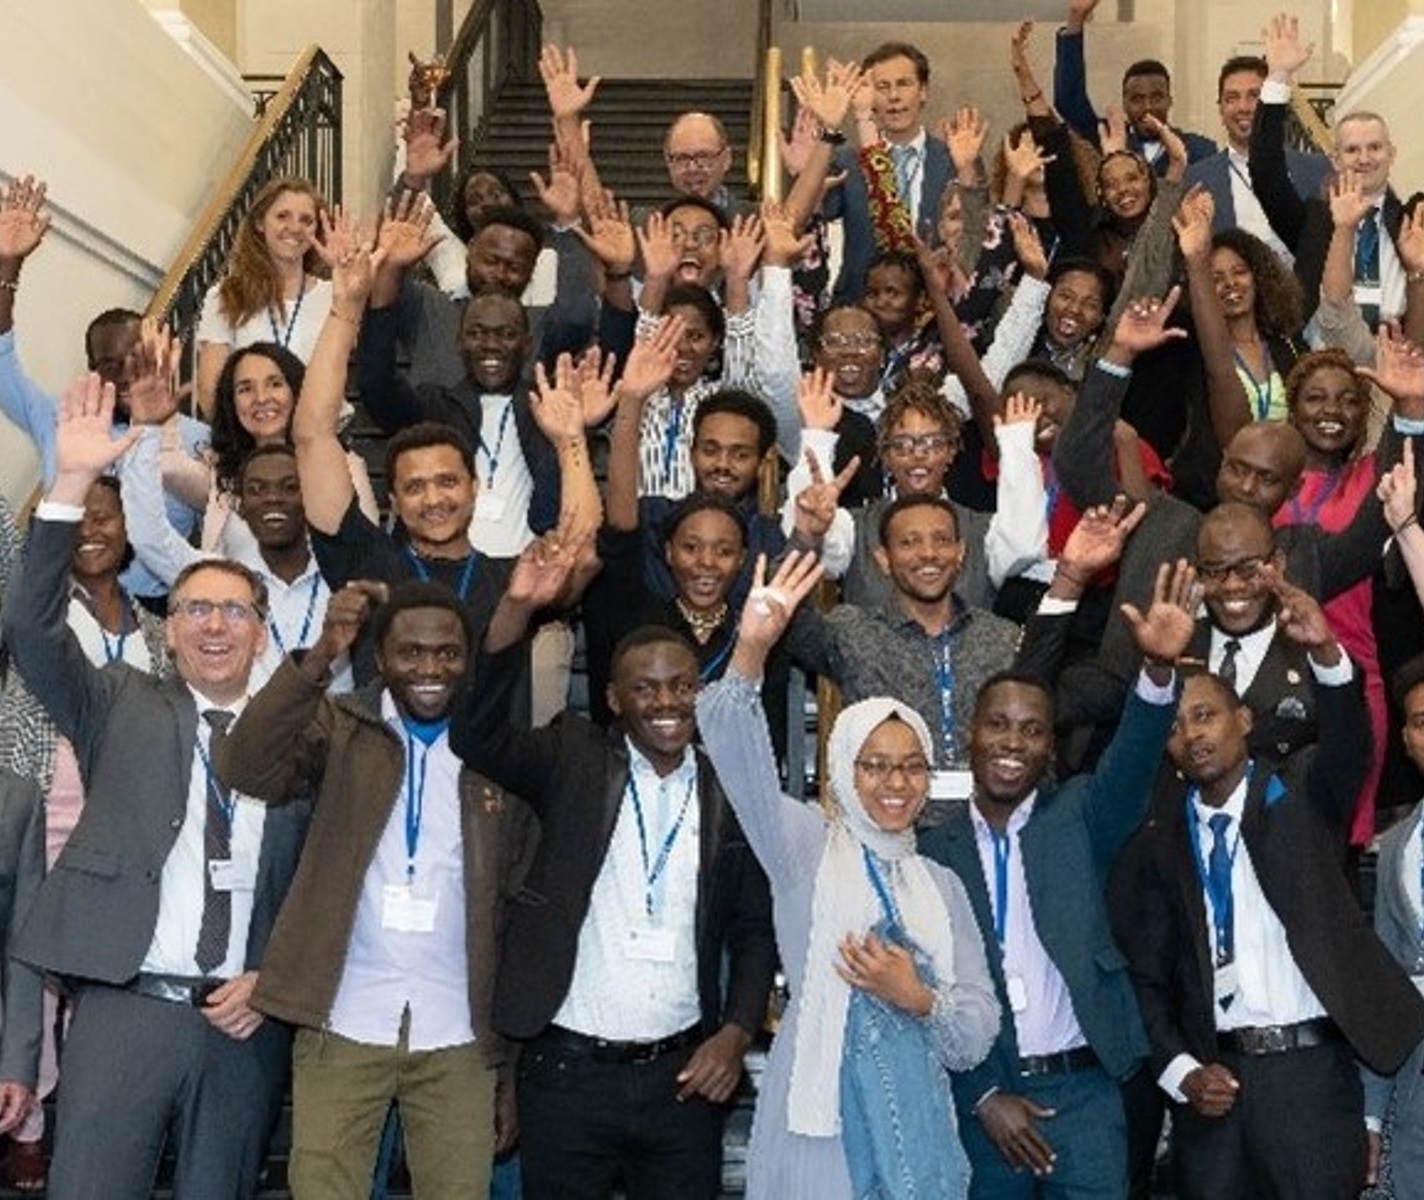 DAAD Leadership for Africa Scholarship 2024 in Germany